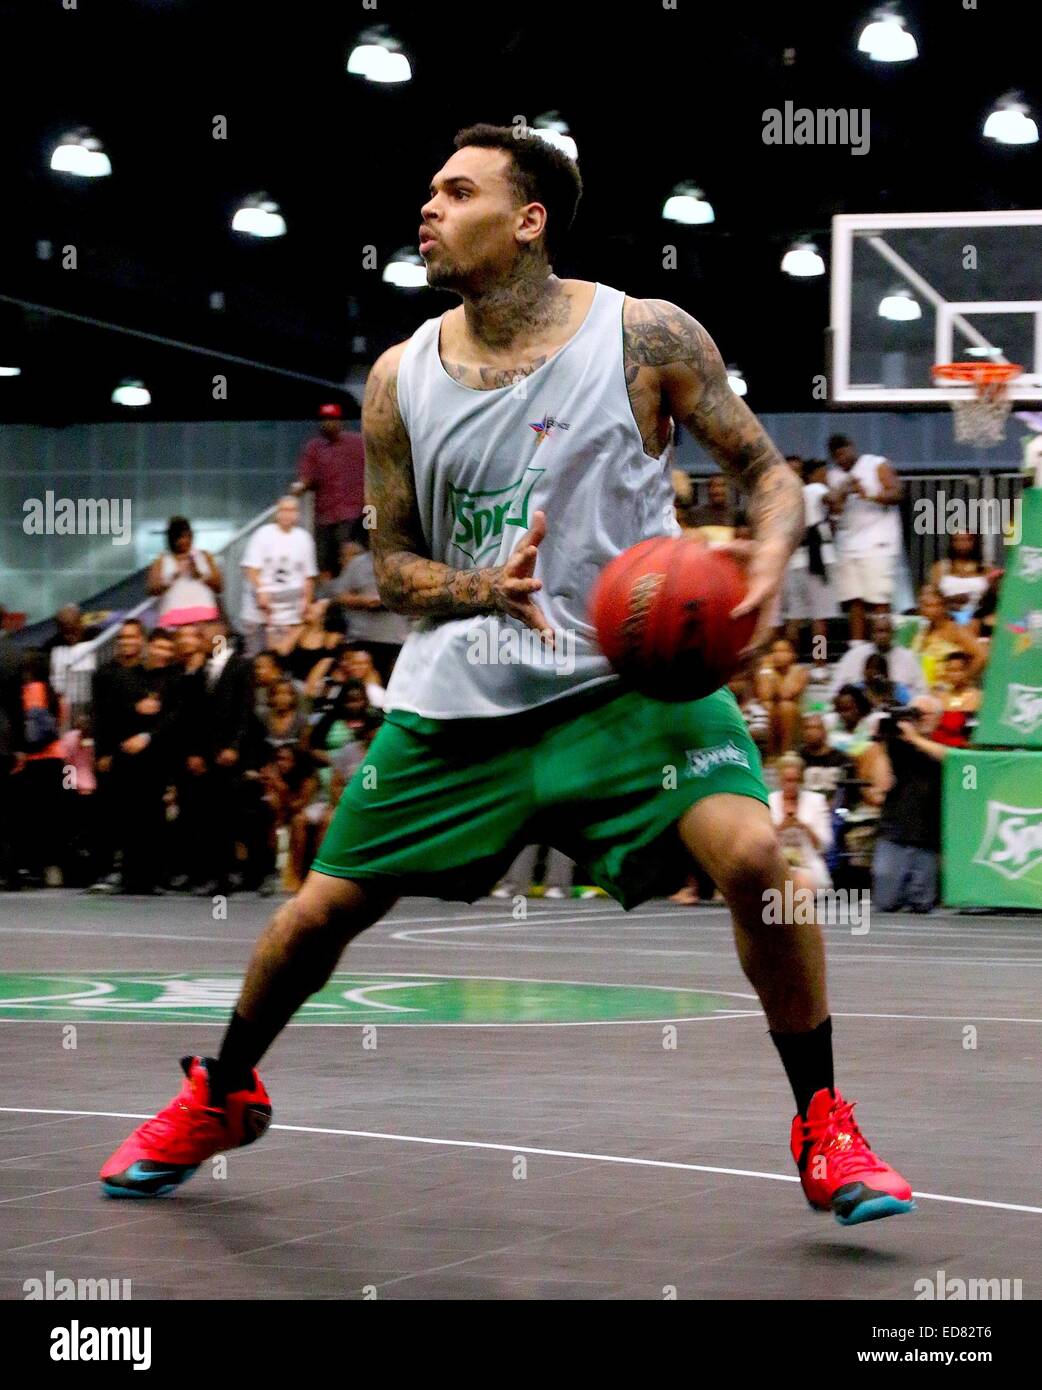 Bet Celebrity Basketball Game Players